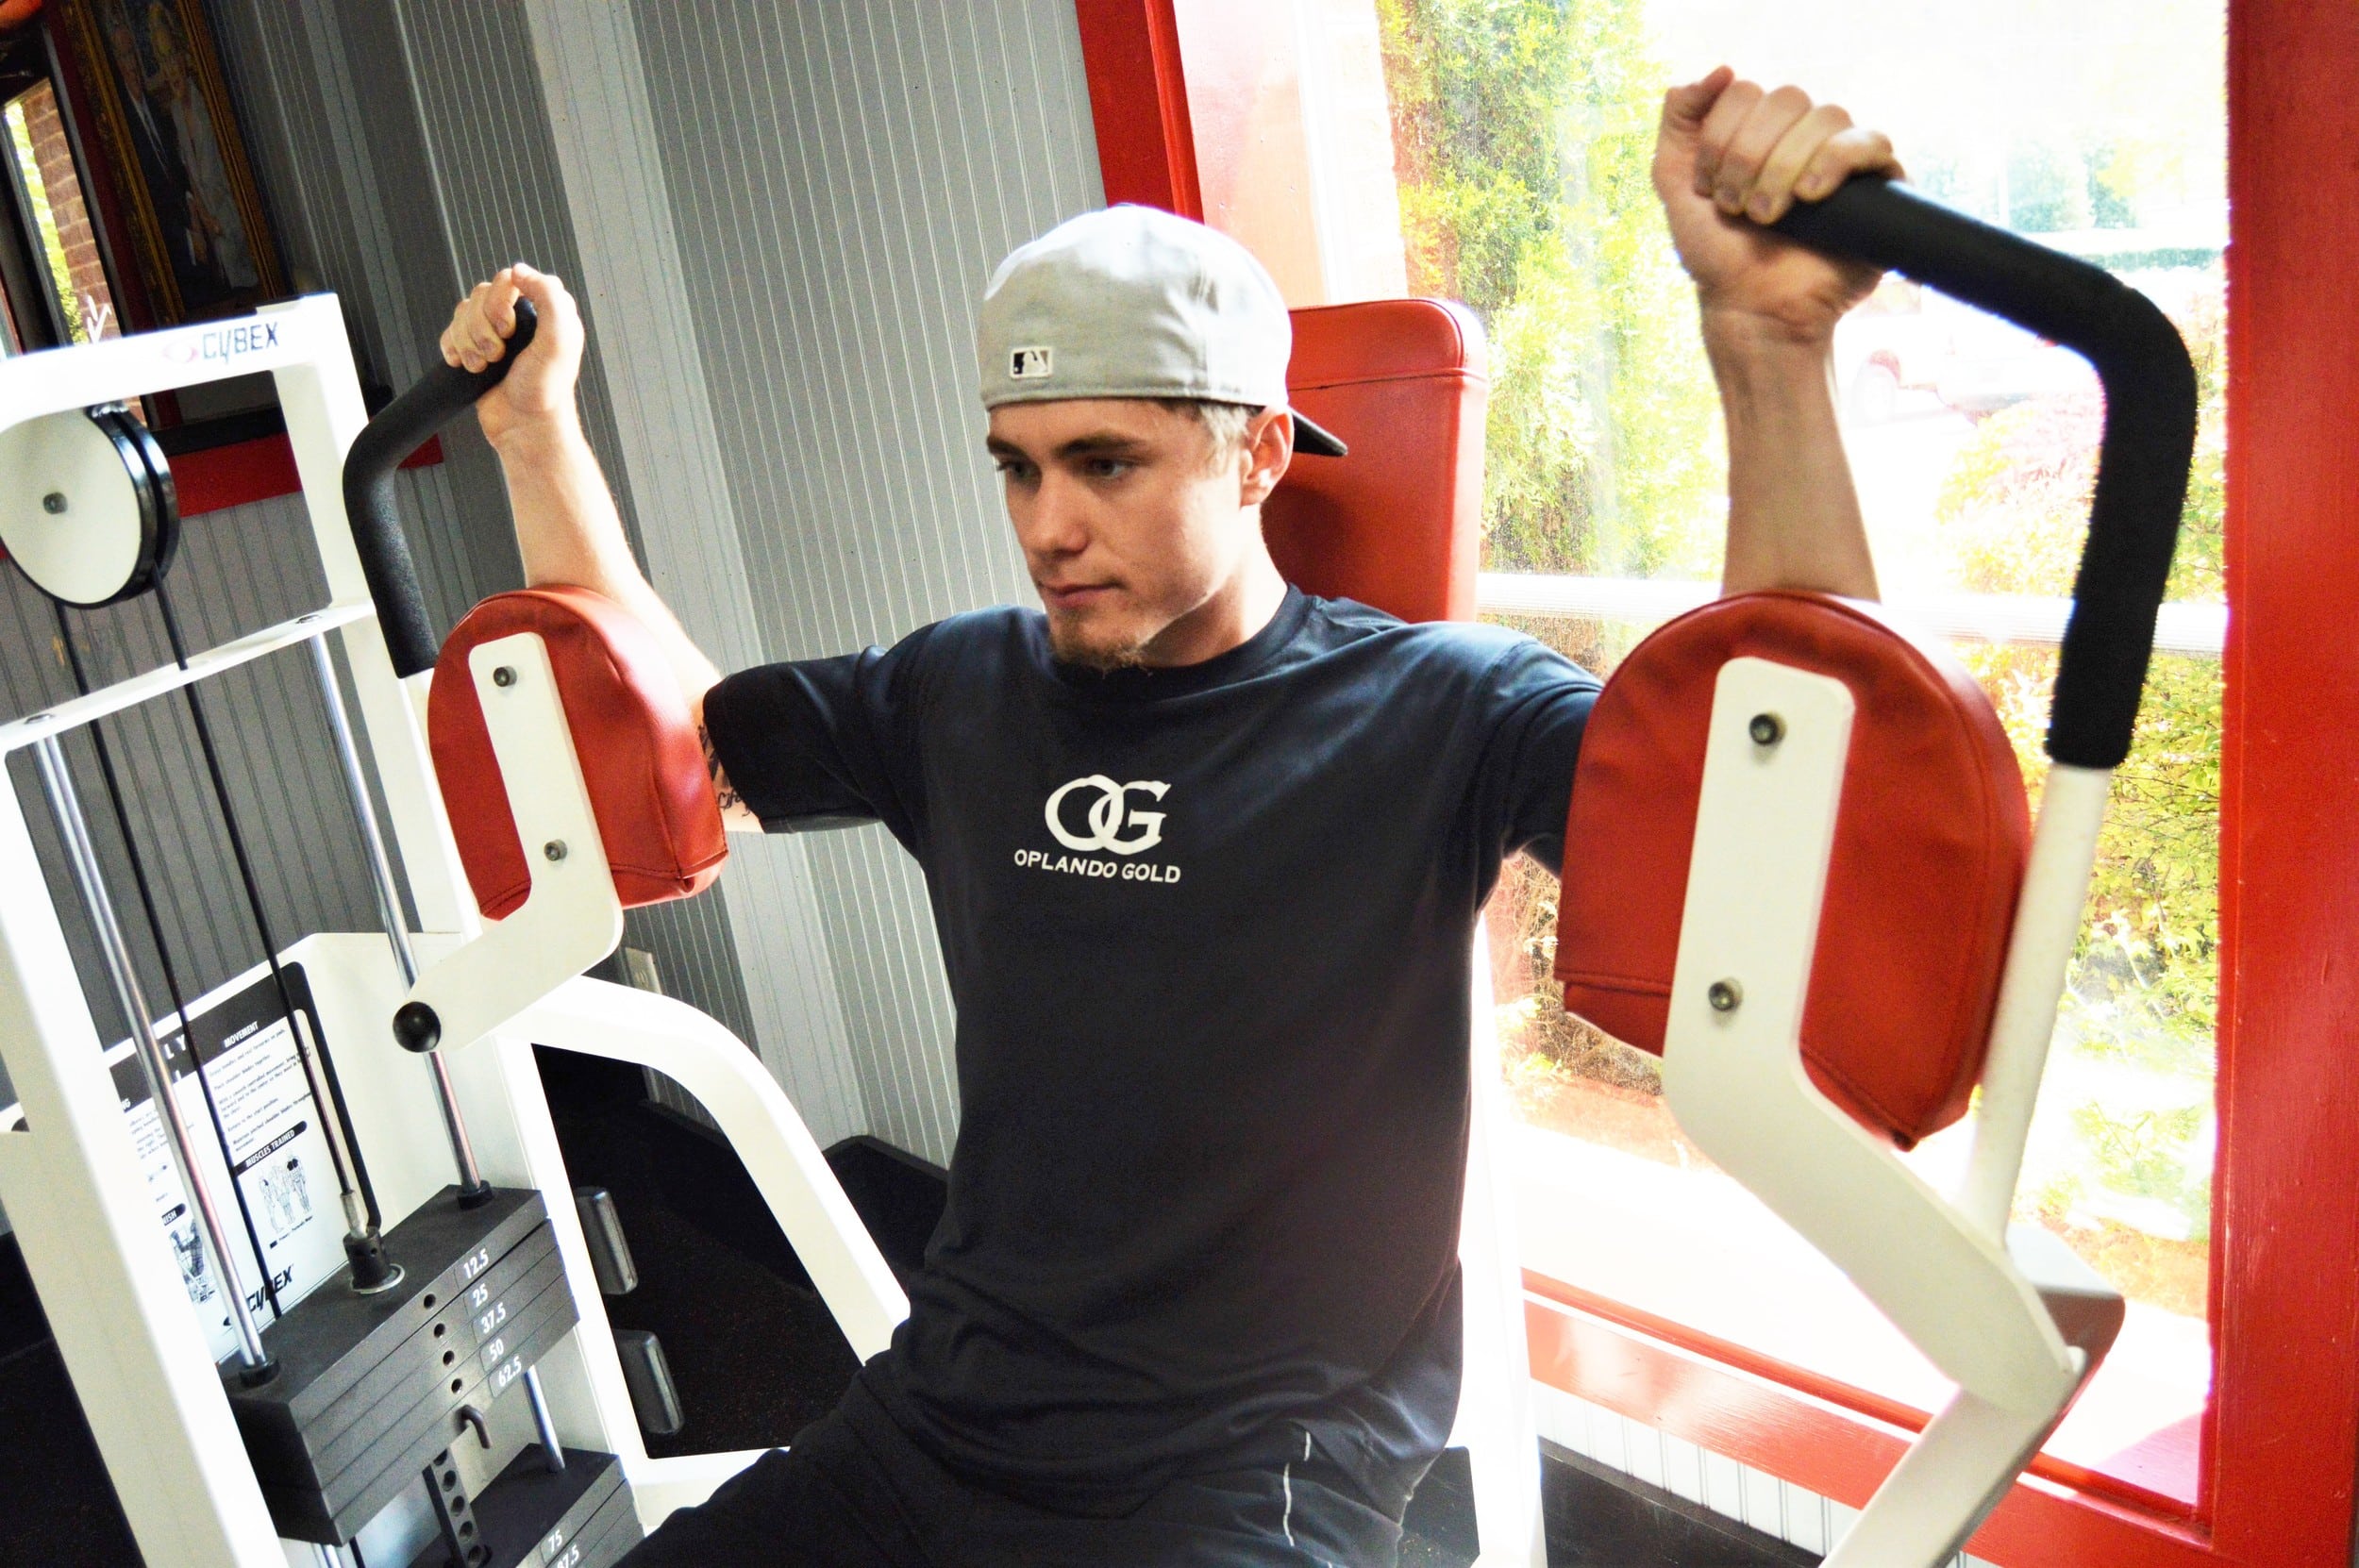 The fly machine works your pectorals. Try completing three sets of 10 reps. Keep it strong! &nbsp;